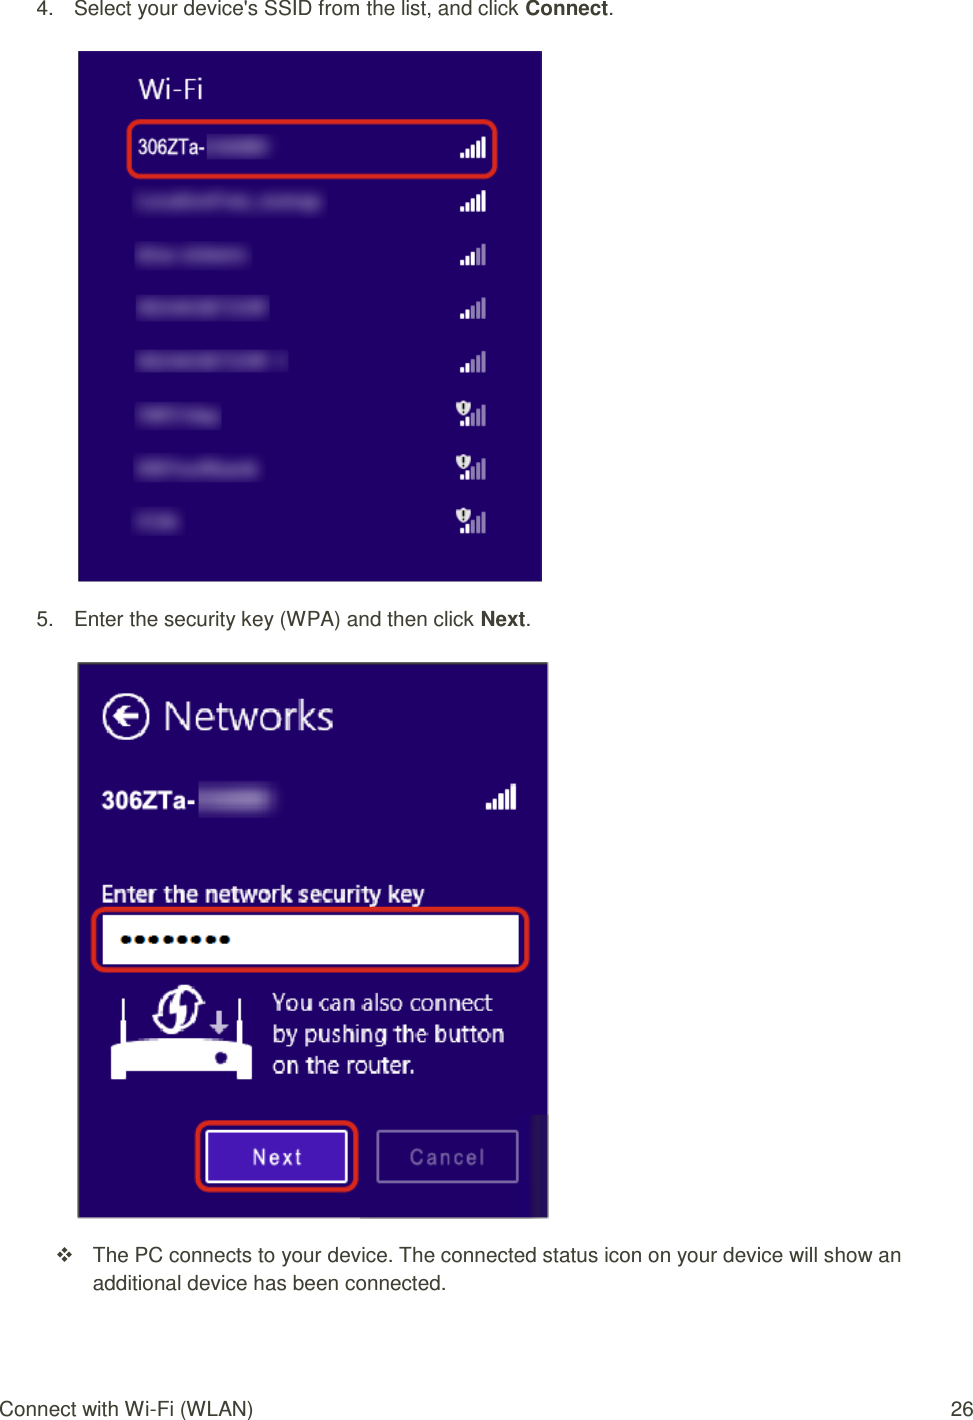 Connect with Wi-Fi (WLAN)  26 4.  Select your device&apos;s SSID from the list, and click Connect.   5.  Enter the security key (WPA) and then click Next.     The PC connects to your device. The connected status icon on your device will show an additional device has been connected. 